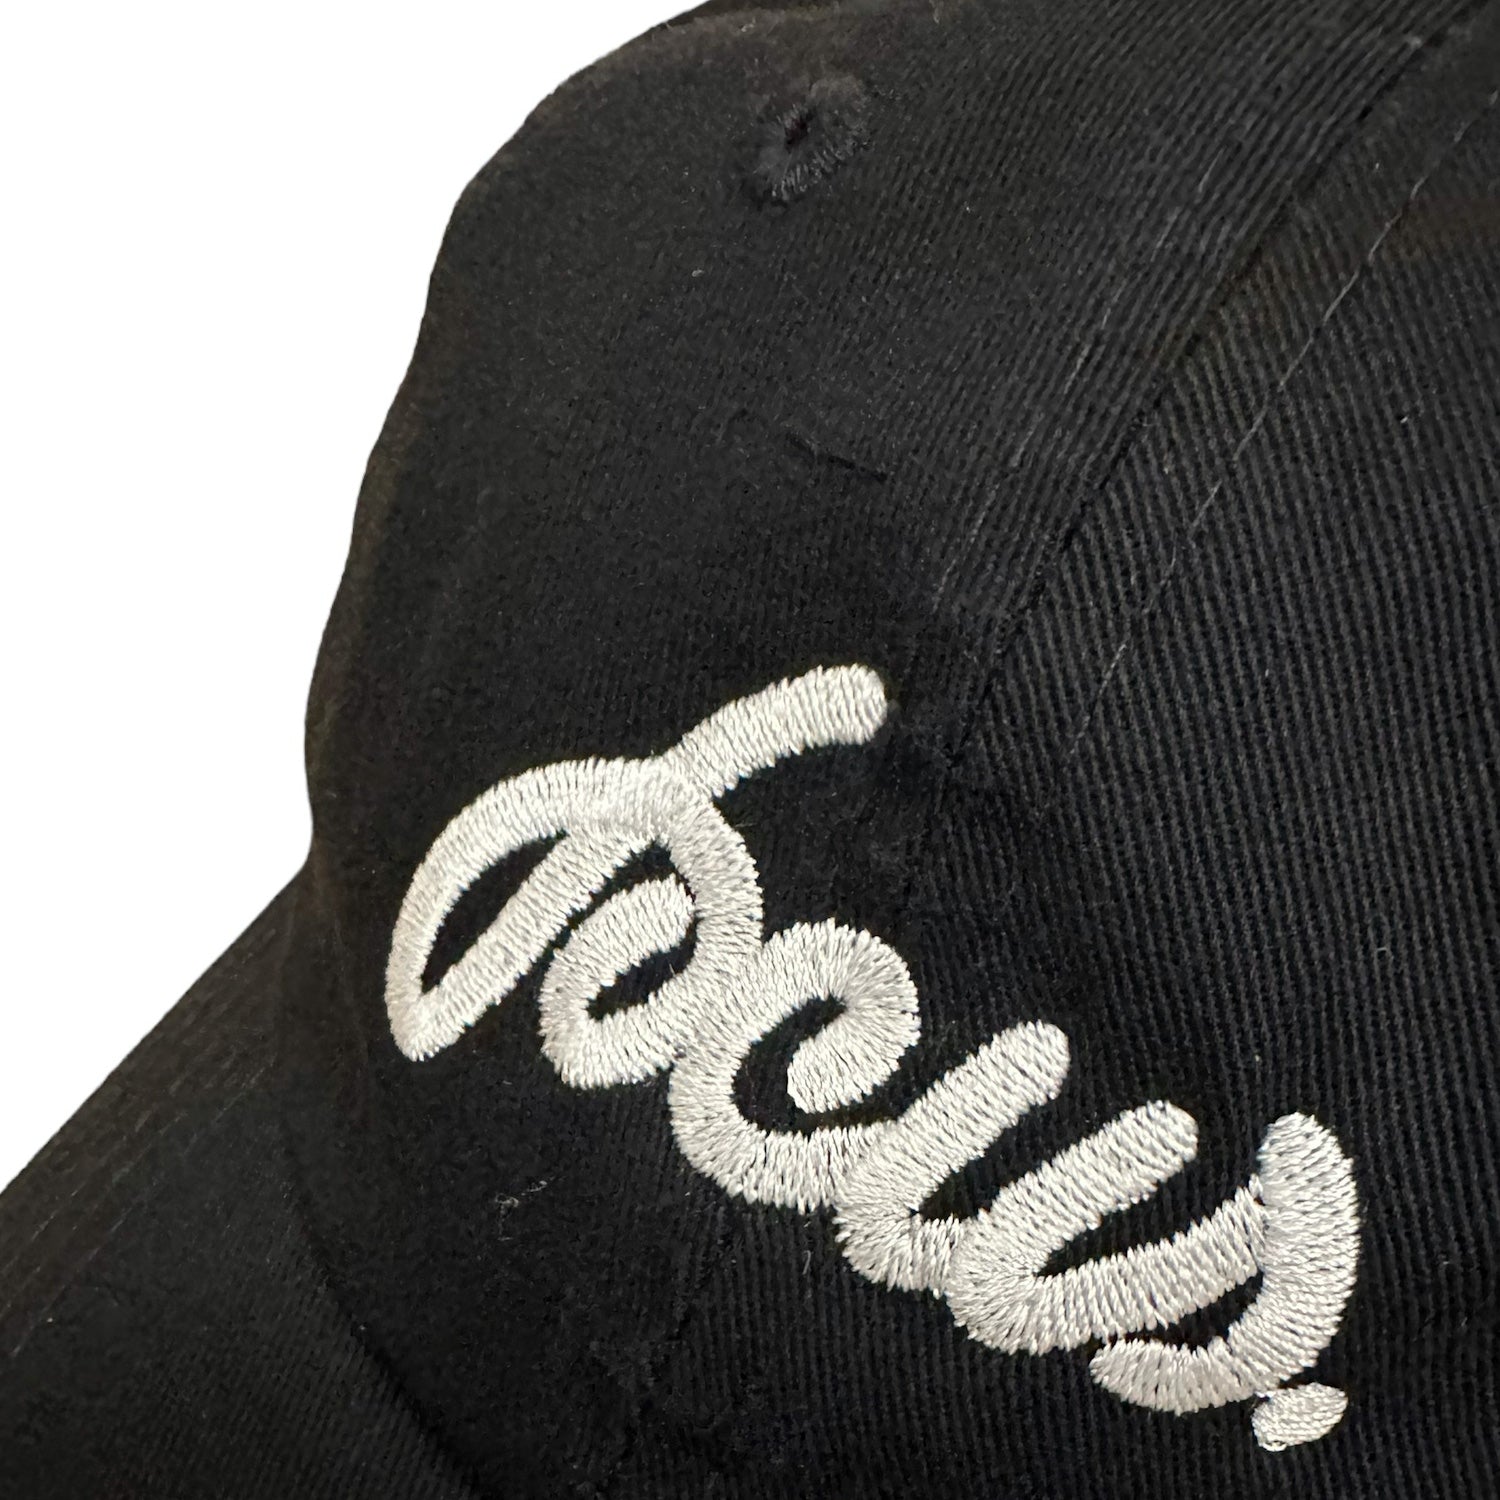 Black focus logo 6 panel cap with white script logo on front. Free uk shipping over £50